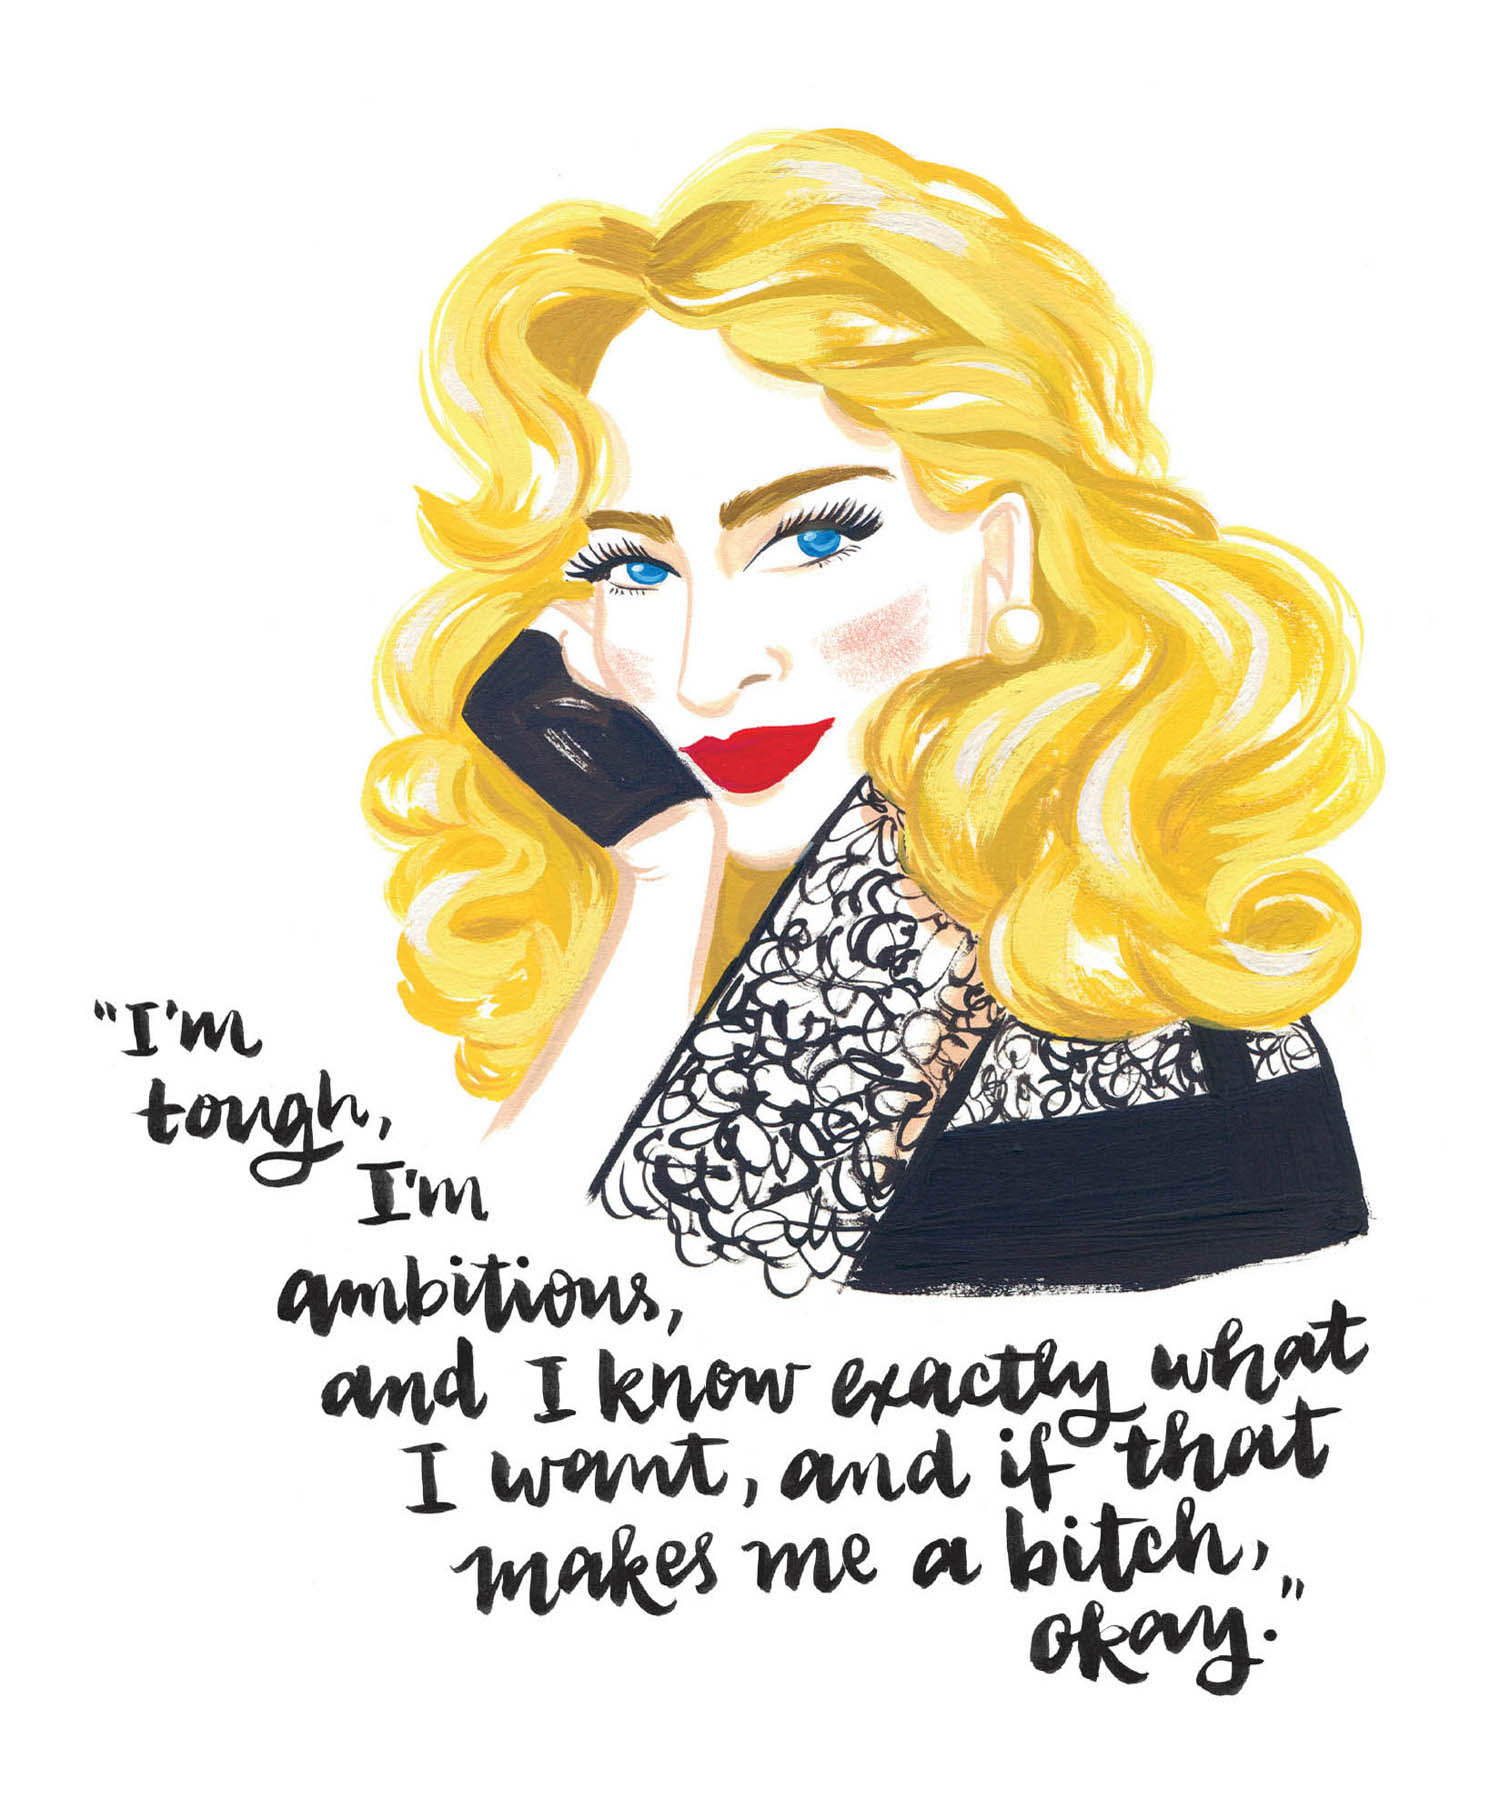 “I’m tough, I’m ambitious, and I know exactly what I want, and if that makes me a bitch, okay.”